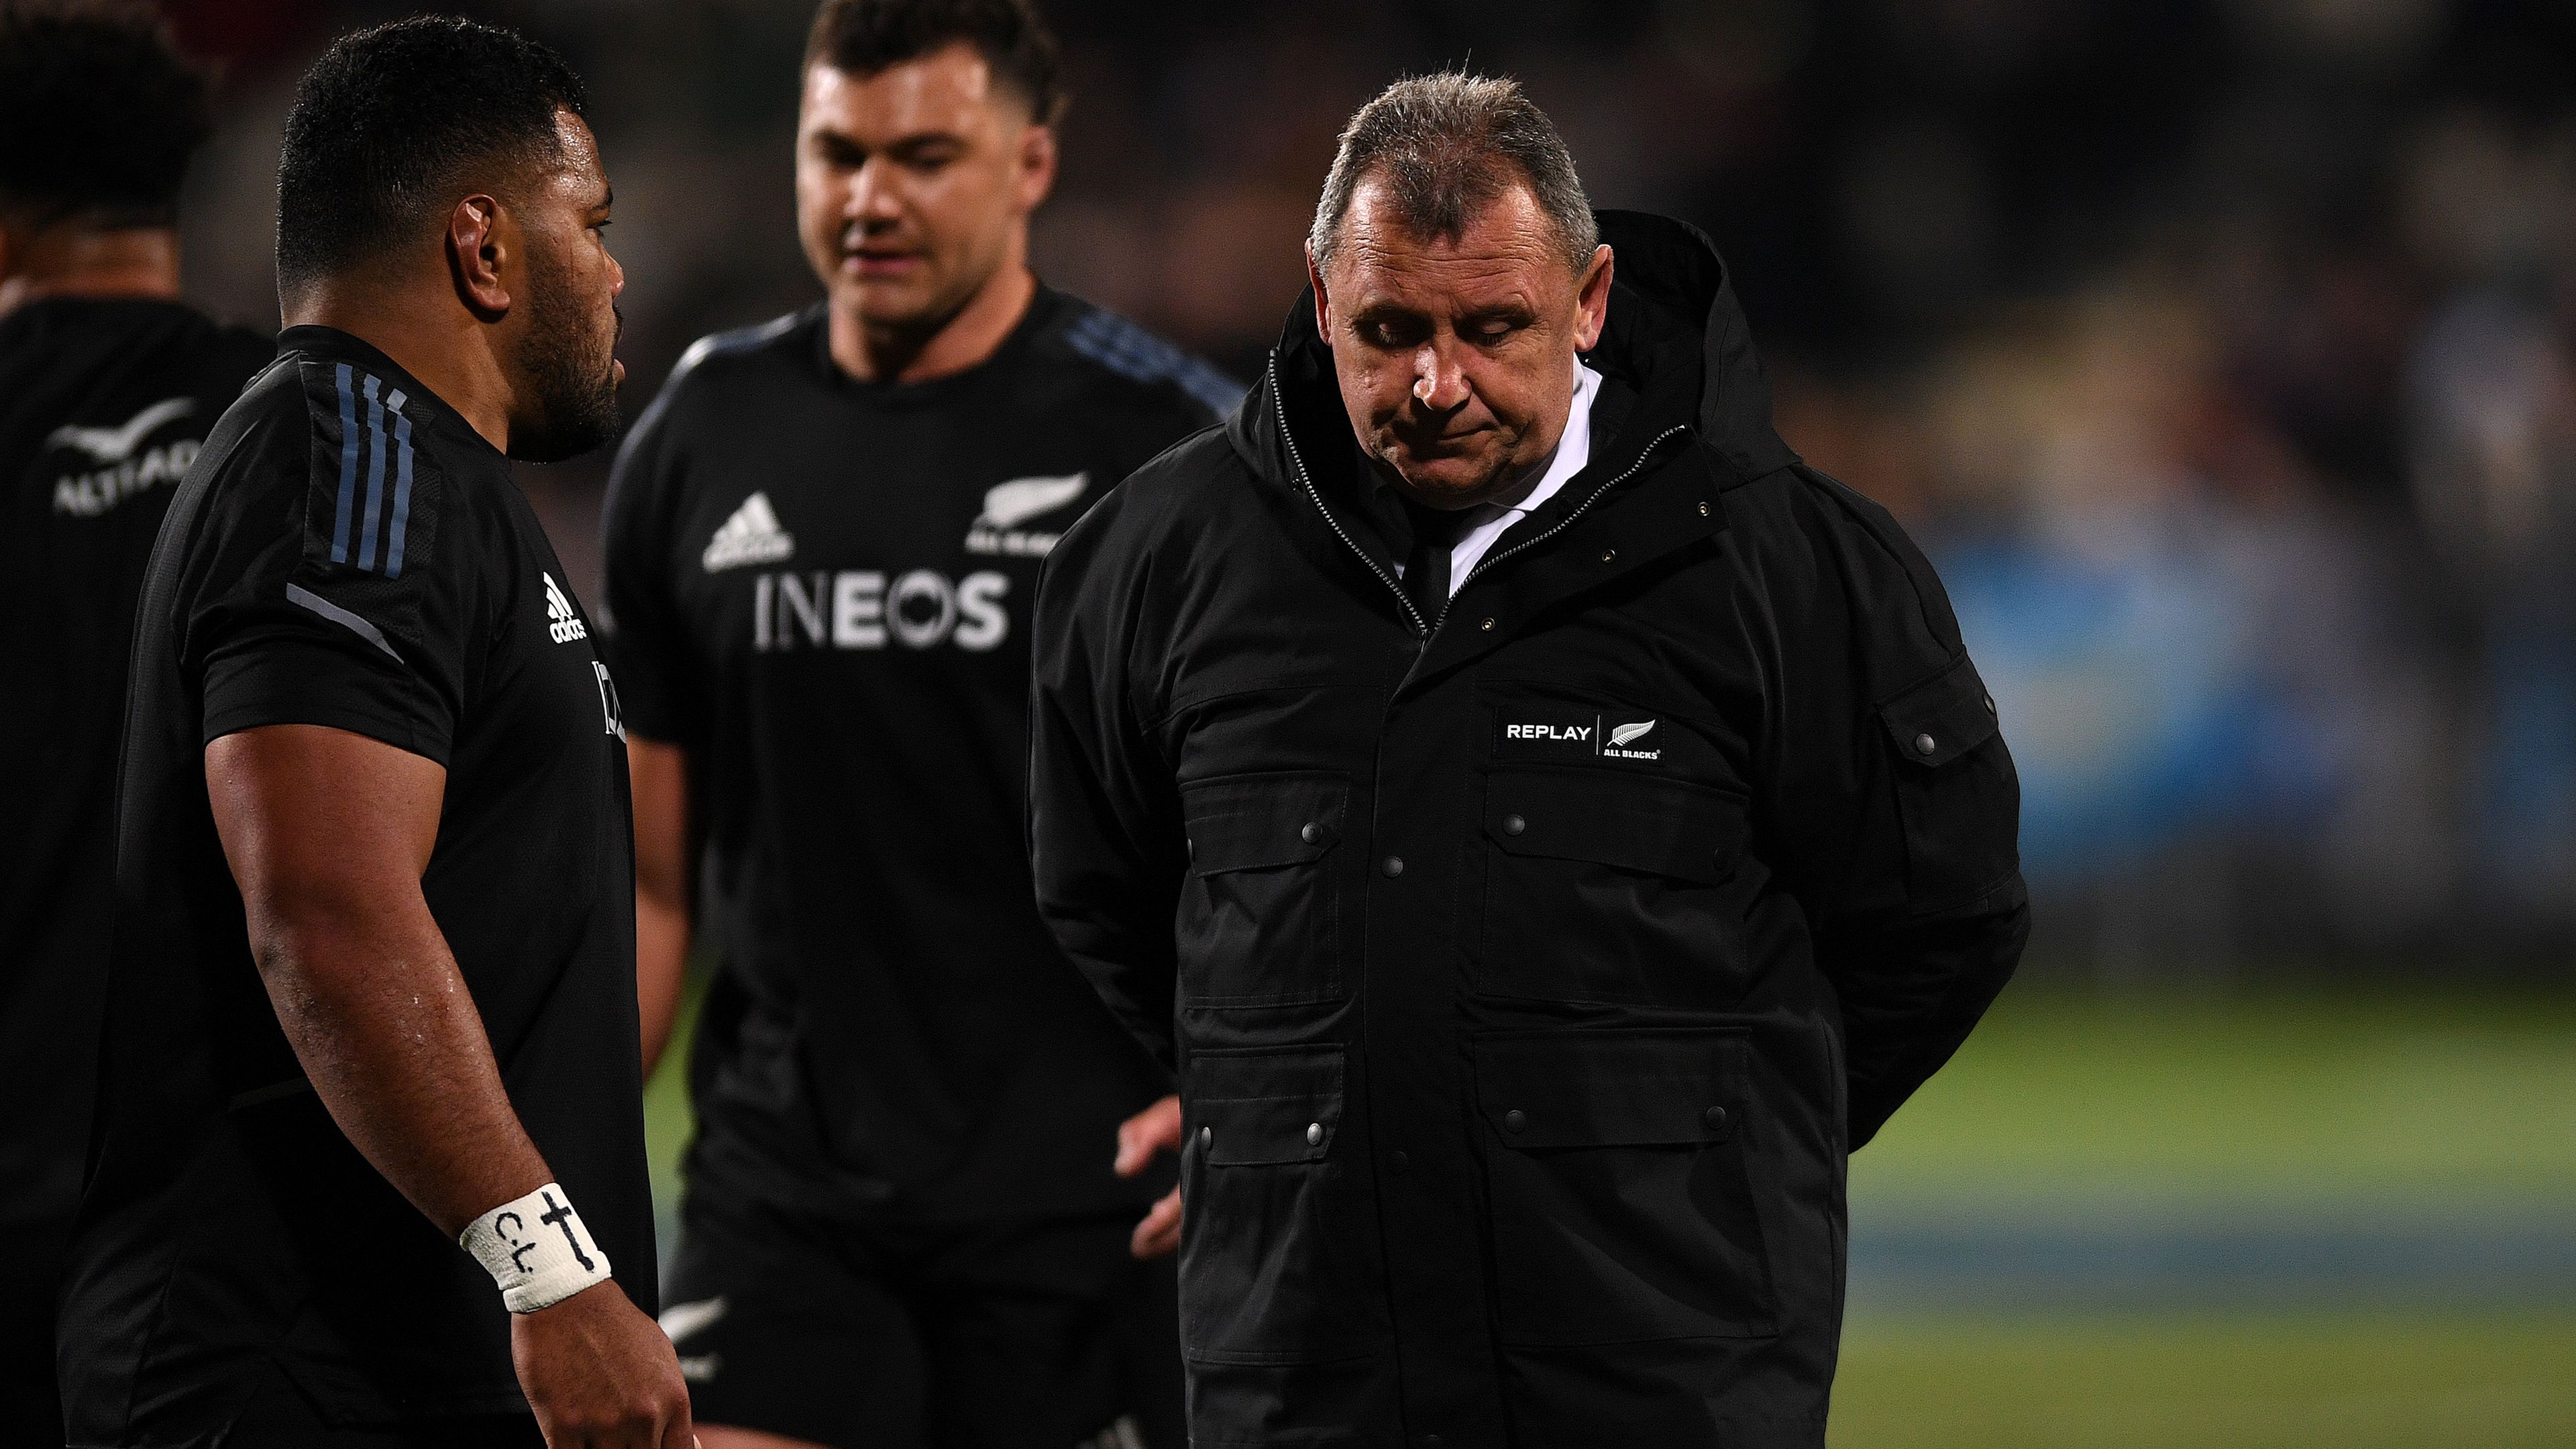 All Blacks' plea after Pumas catastrophe: 'Now is the time to get in behind'